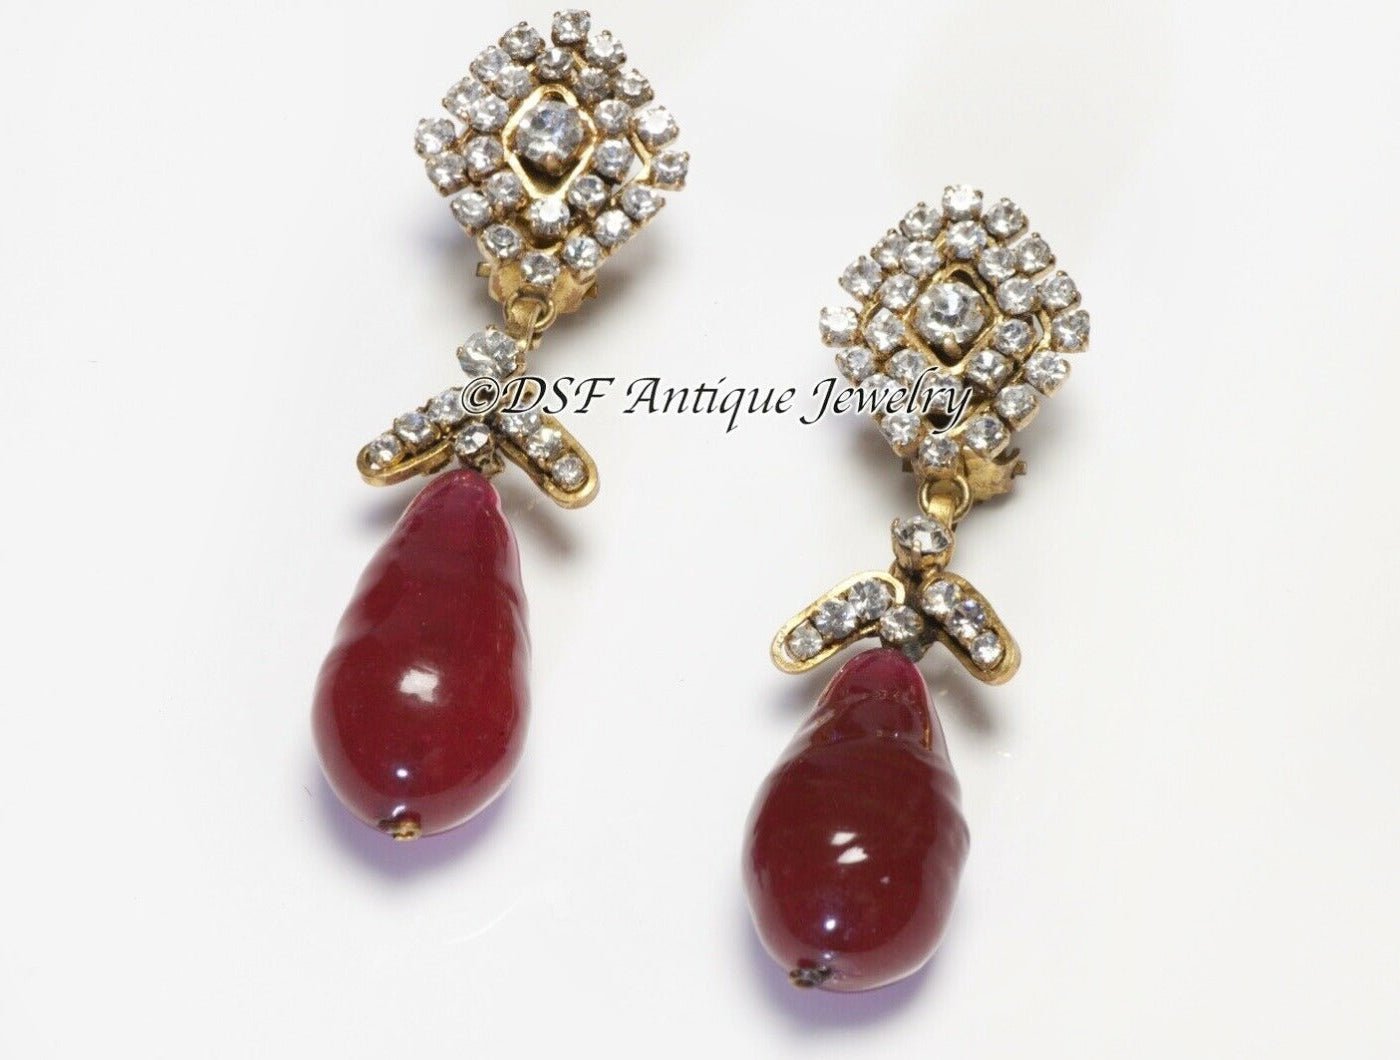 CHANEL Paris 1983 Maison Gripoix Red Poured Glass Crystal Drop Earrings - DSF Antique Jewelry